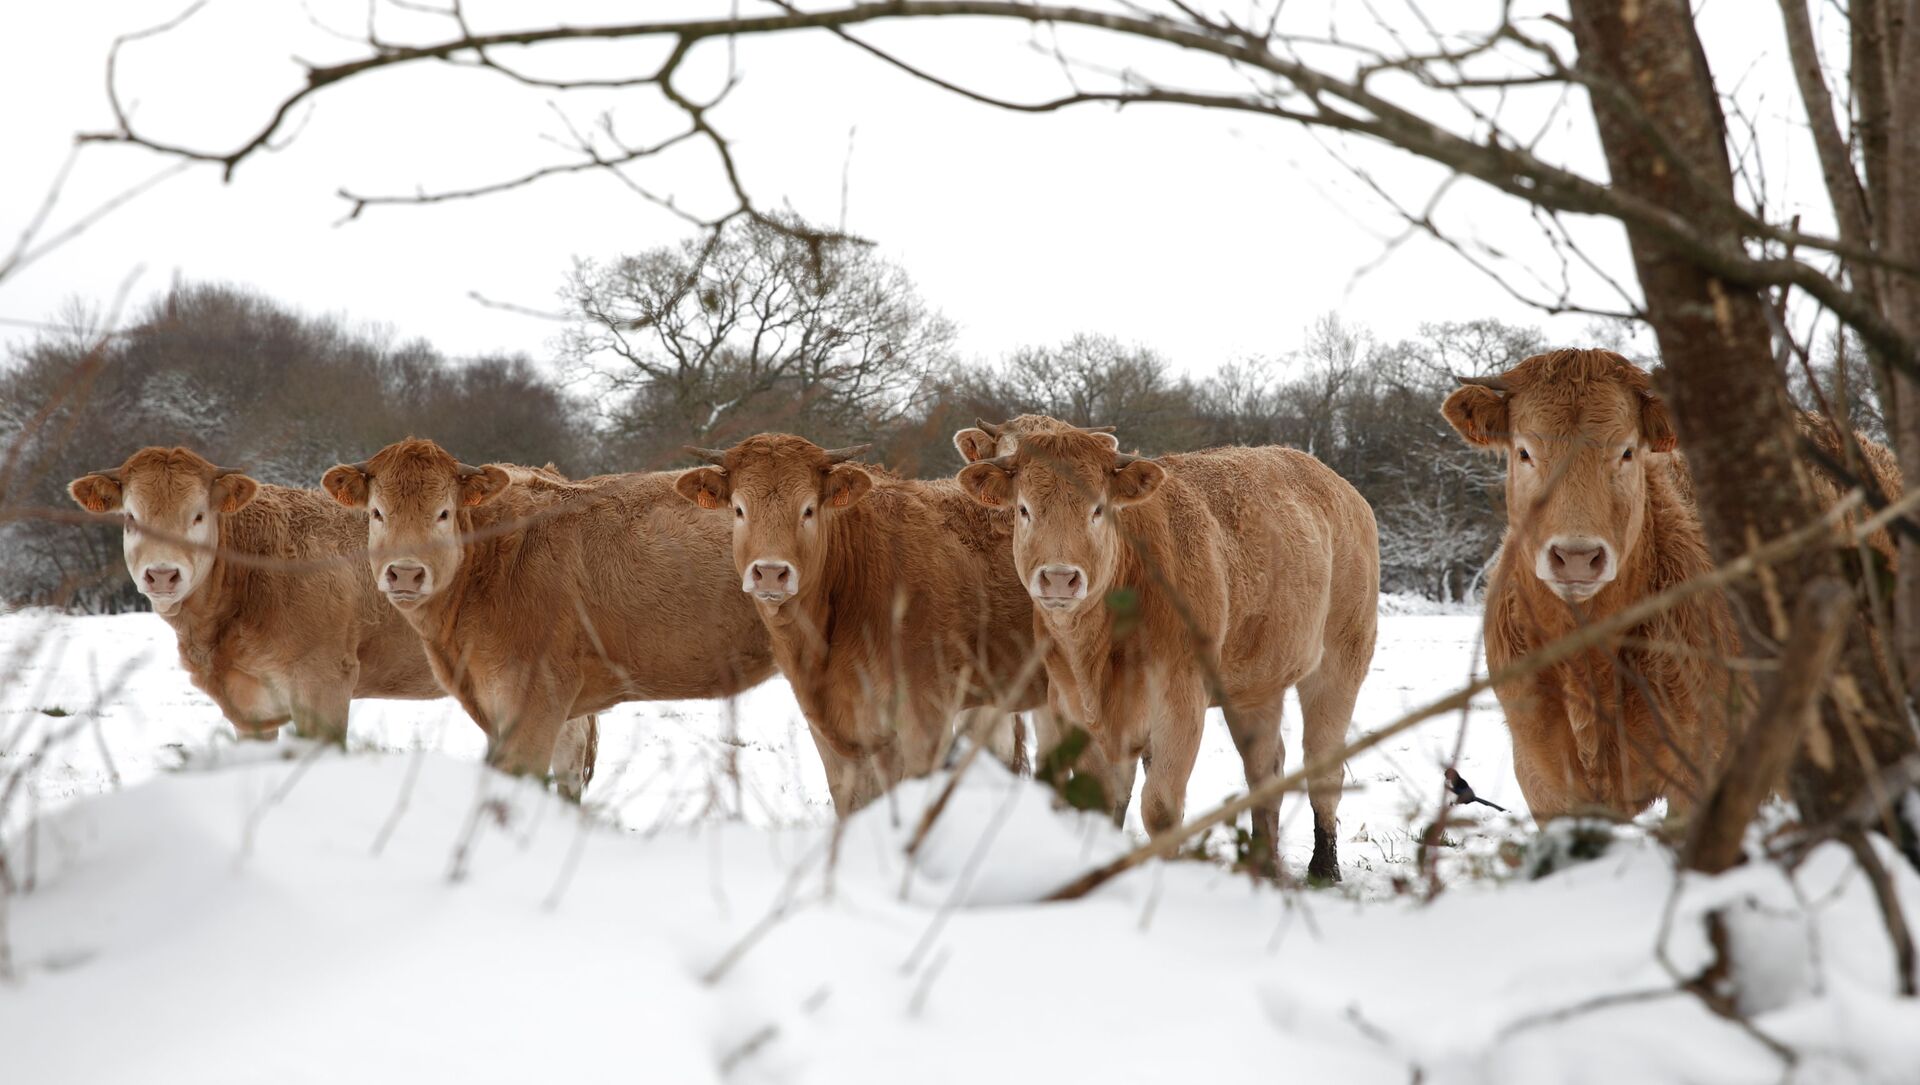 Cows are photographed on a snow-covered meadow in Plounevez-Moedec in the French western region of Brittany, as winter weather with snow and cold temperatures hits a large northern part of the country, France, February 10, 2021 - Sputnik International, 1920, 06.03.2021